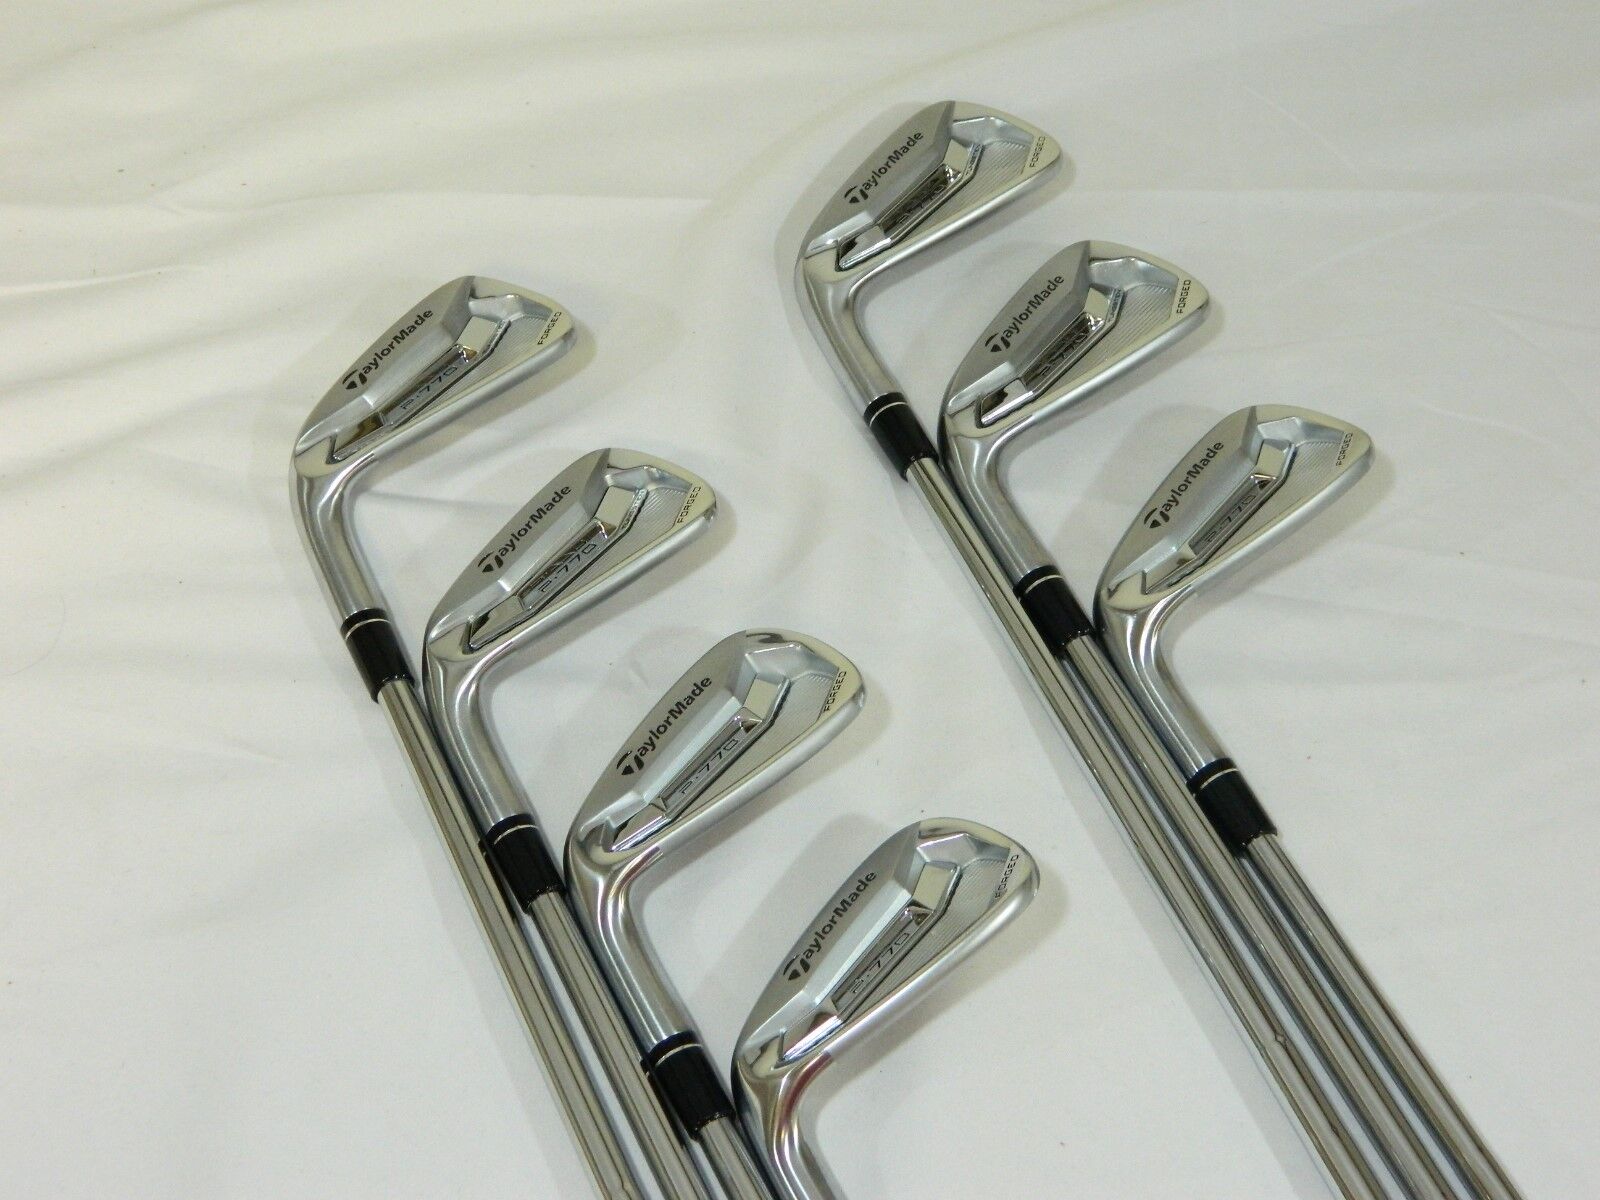 New LH Taylormade P770 Forged Iron set 4-PW KBS Tour FLT EXTRA Stiff irons P-770